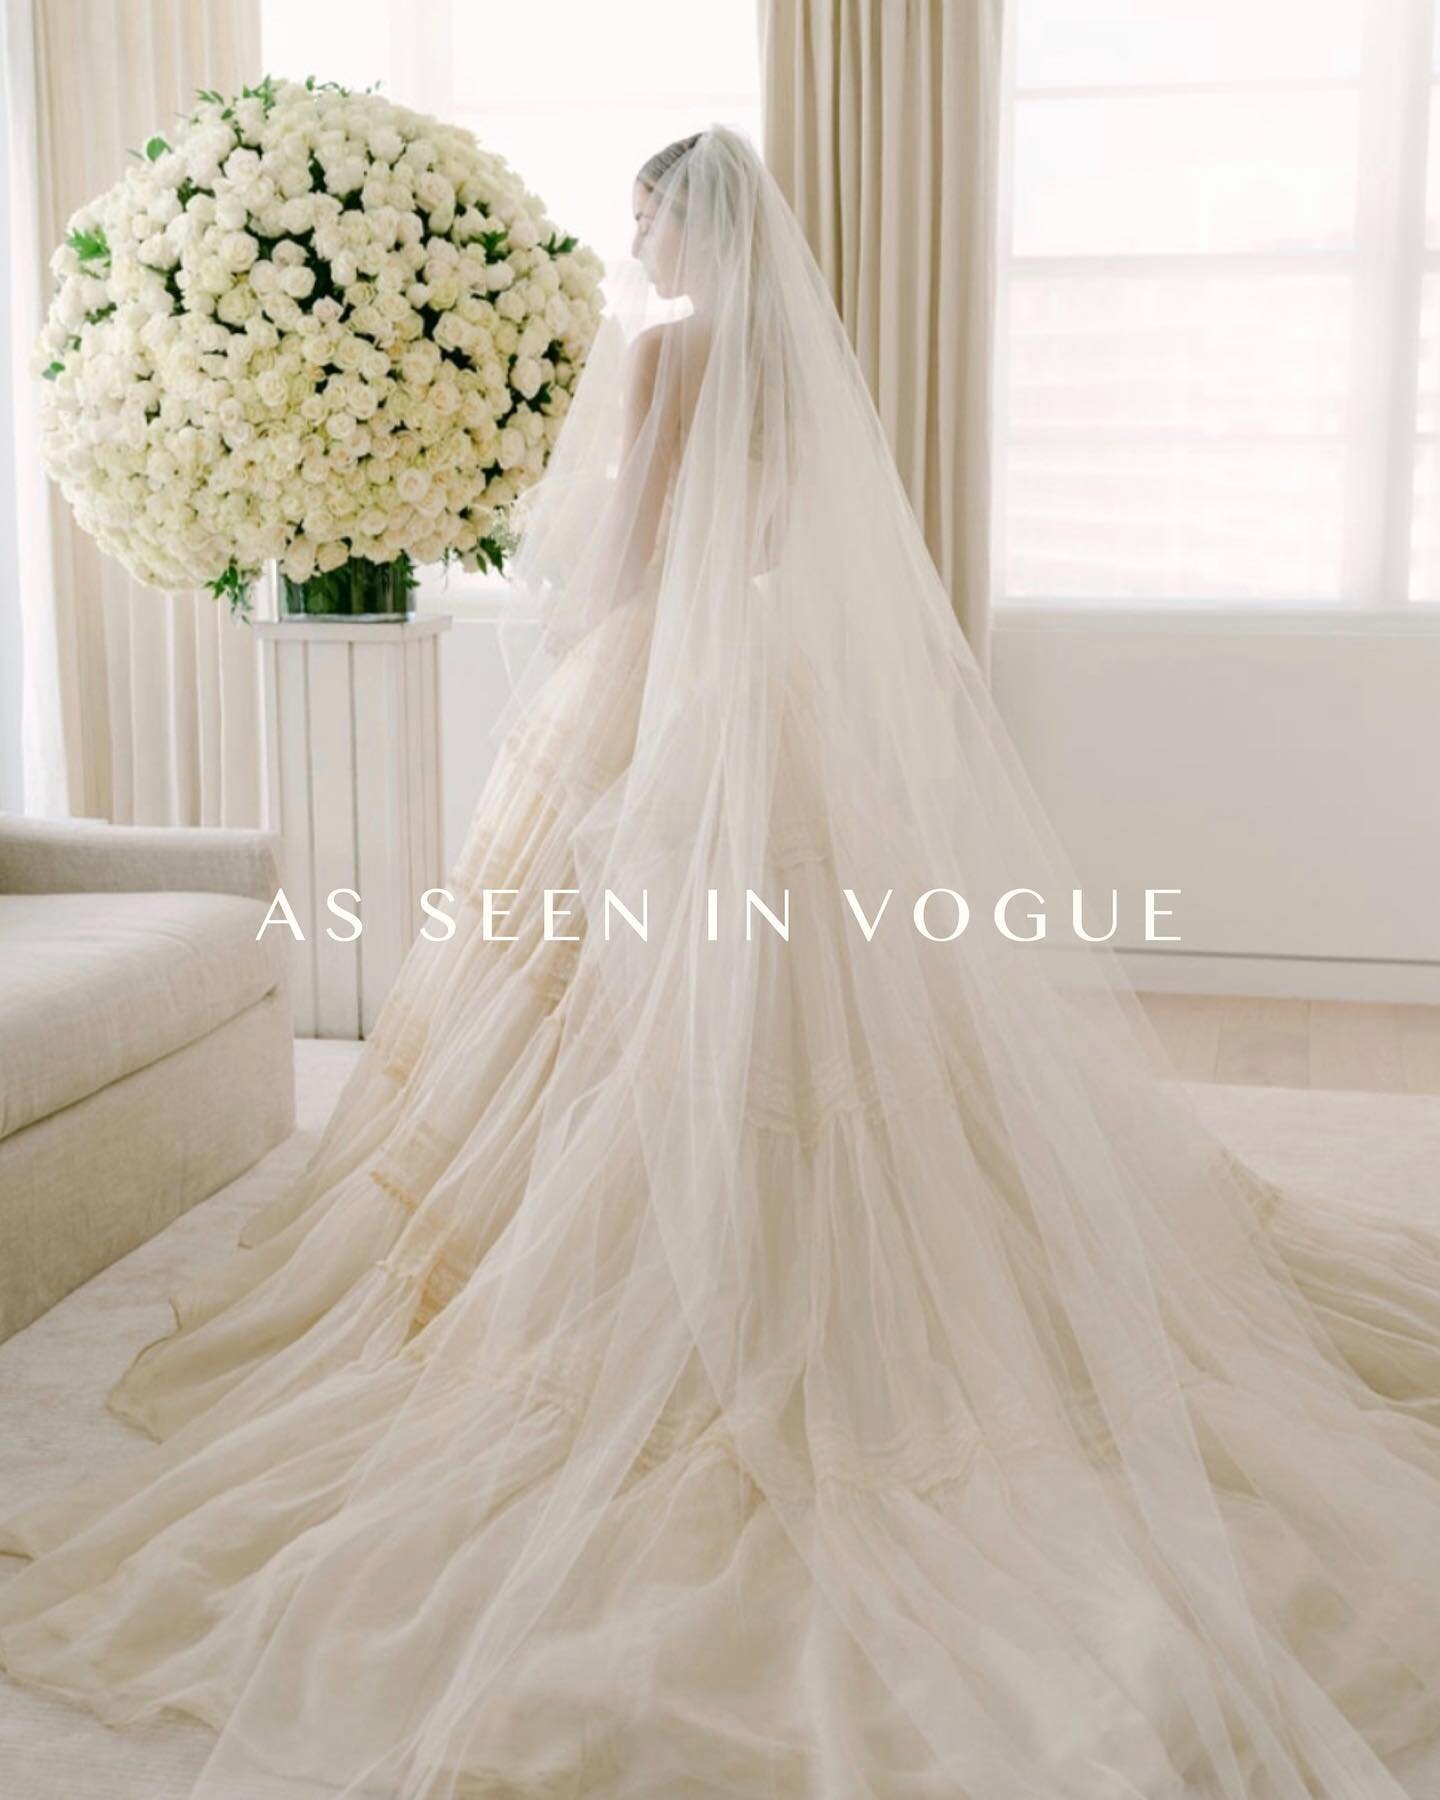 Eunice and Mikey&rsquo;s wedding now featured in Vogue! Check out the whole feature to see how to micro wedding like American Royalty! (📸 @ktmerry)
.
.
.
@vogueweddings @vogue @overthemoon @askplannie #vogueweddings #voguewedding #microwedding #daug